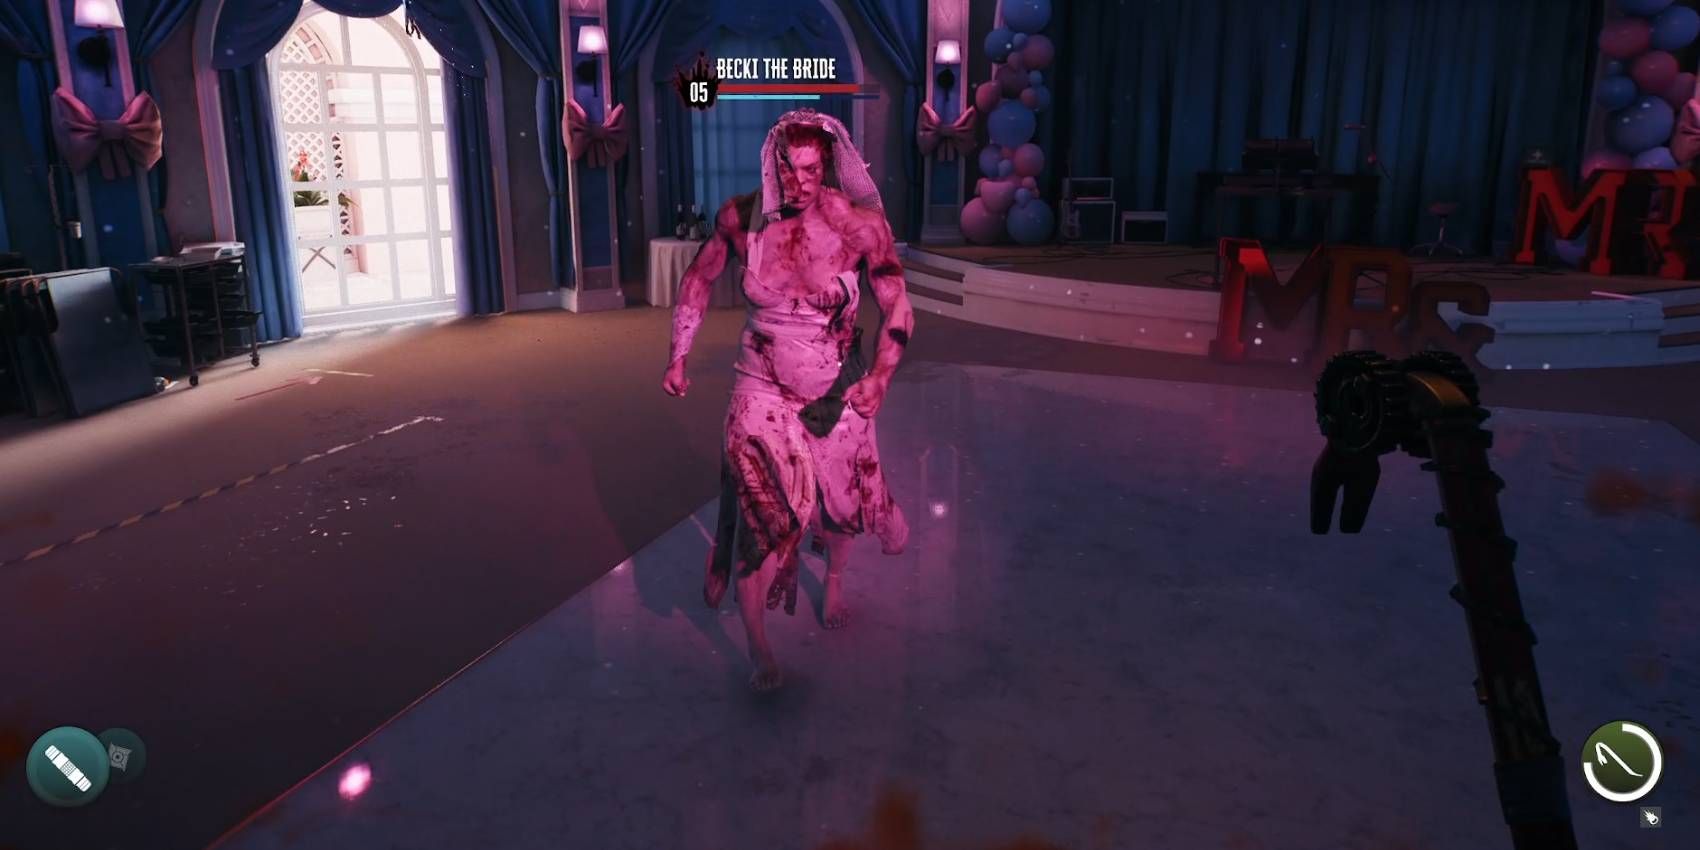 Dead Island 2 Becki the Bride Boss Fight with Enemy Health and Stability Health Shown Player Perspective Screenshot